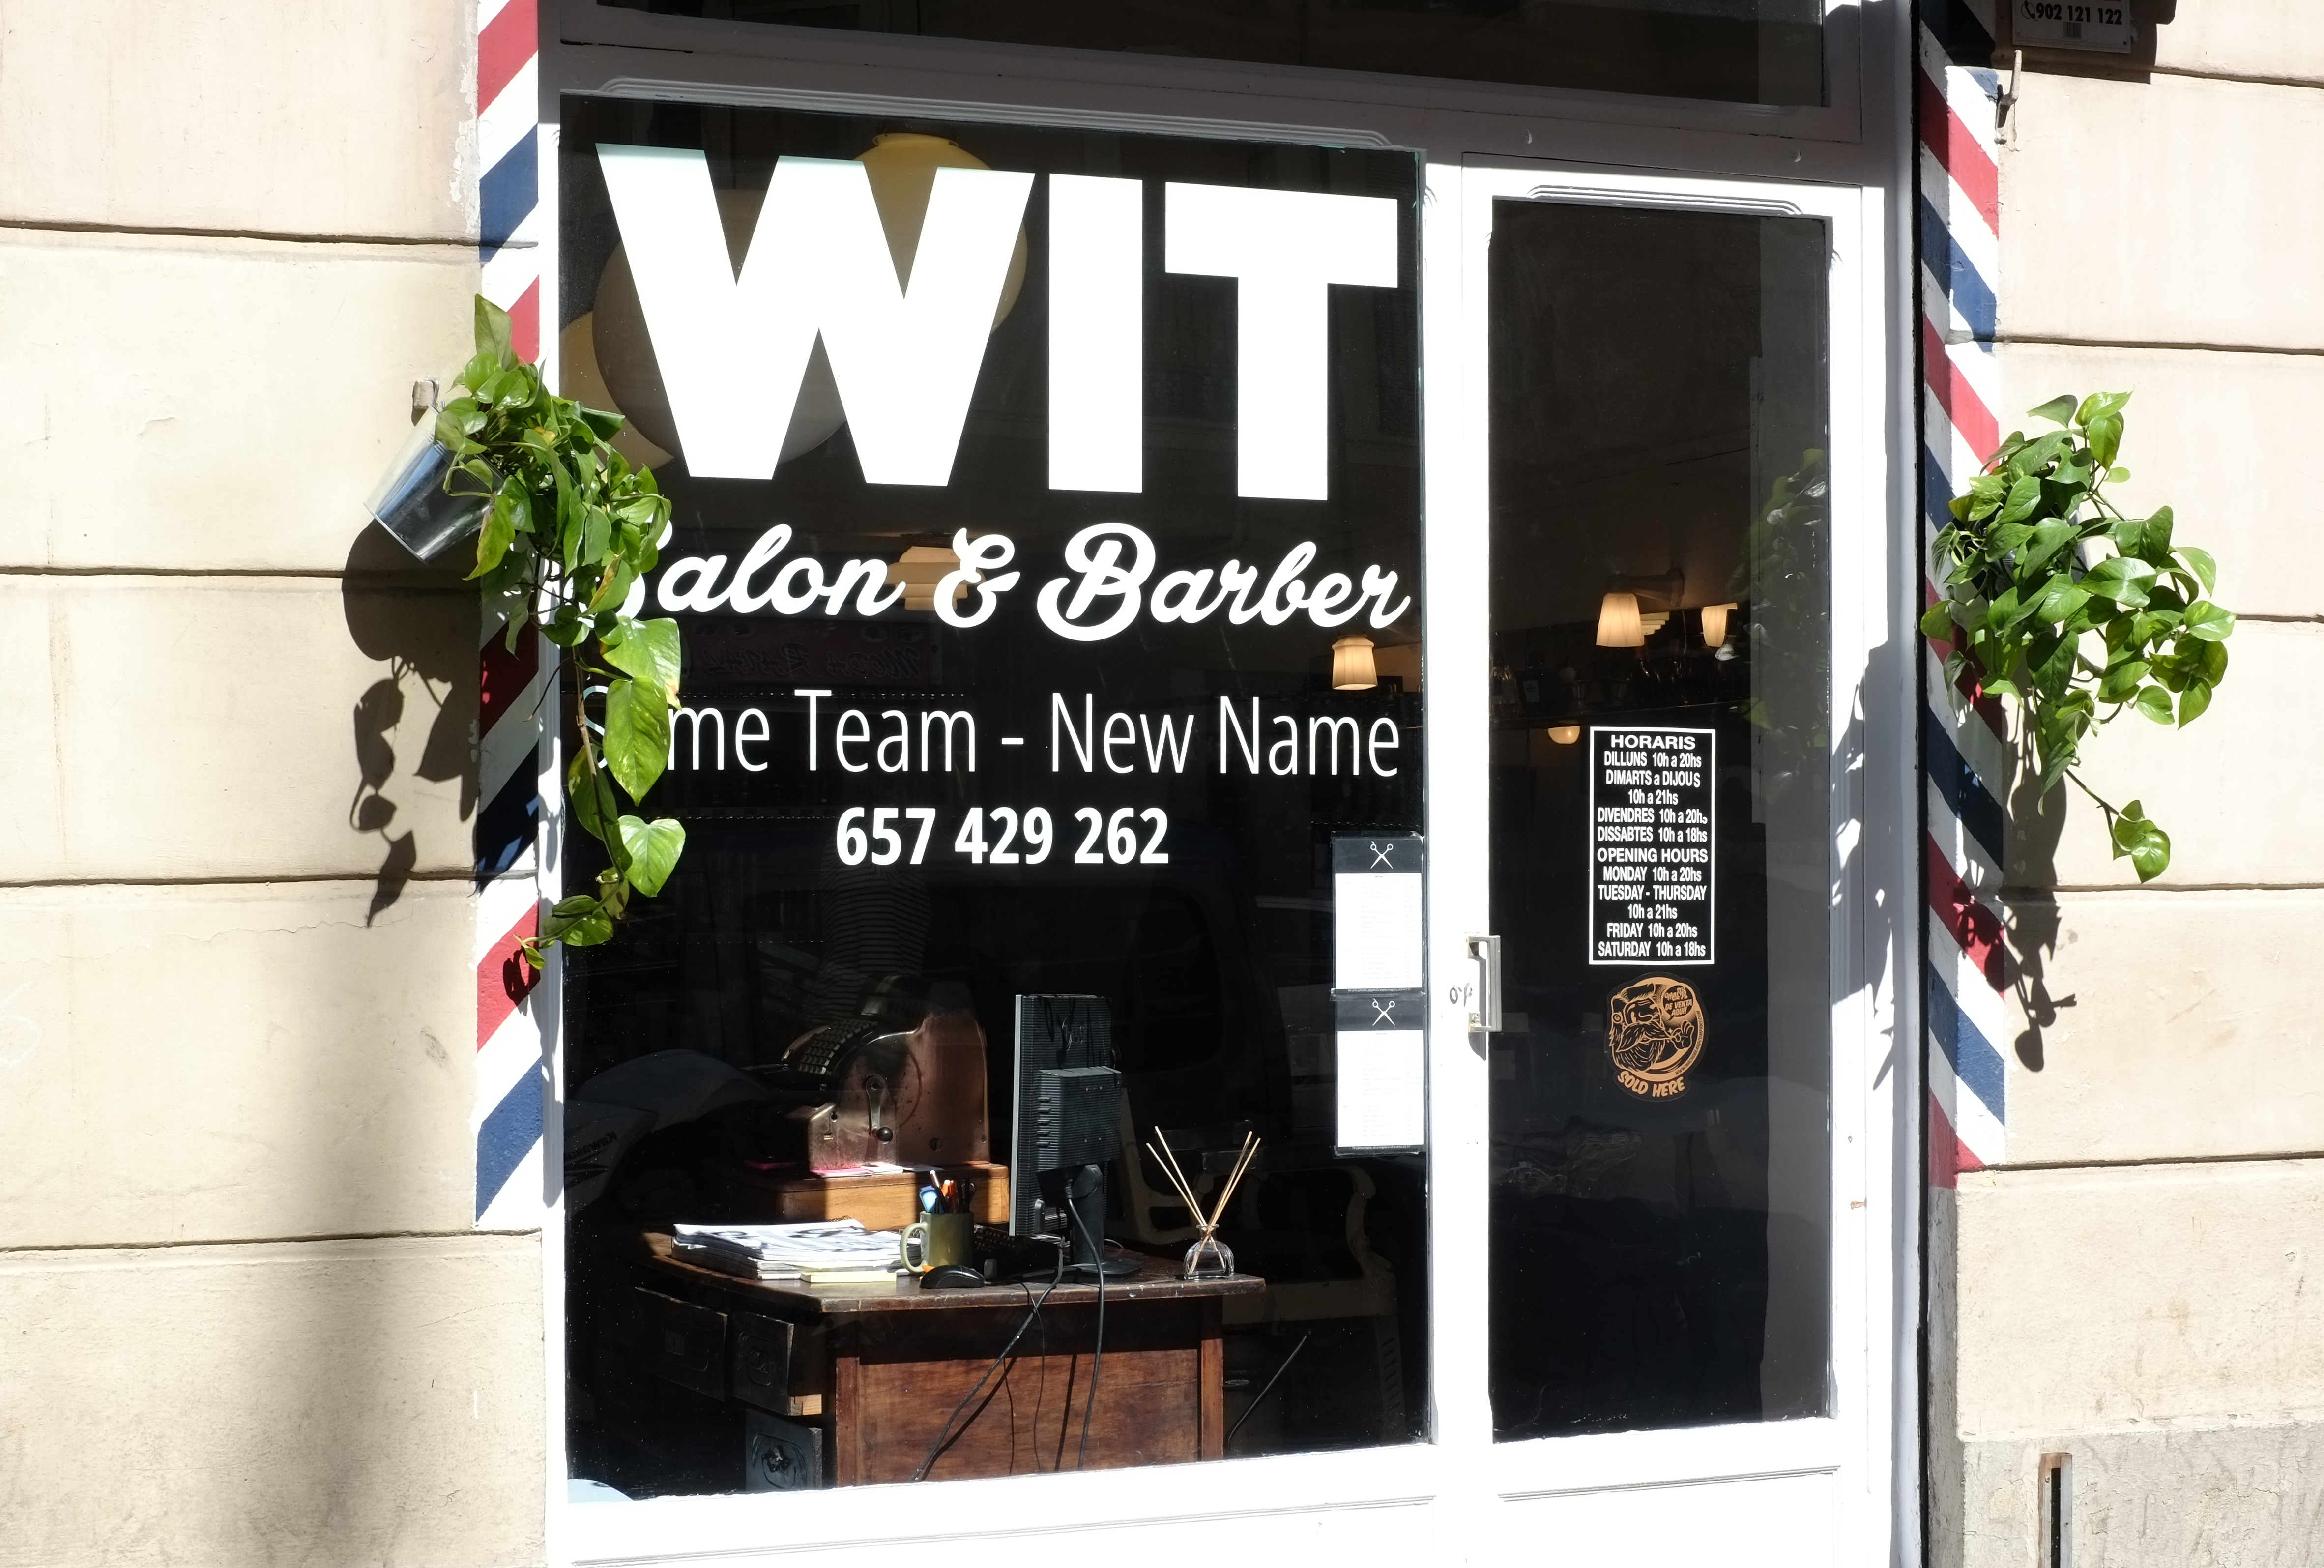 Who are Wit Salon & Barber? | Hair Academy